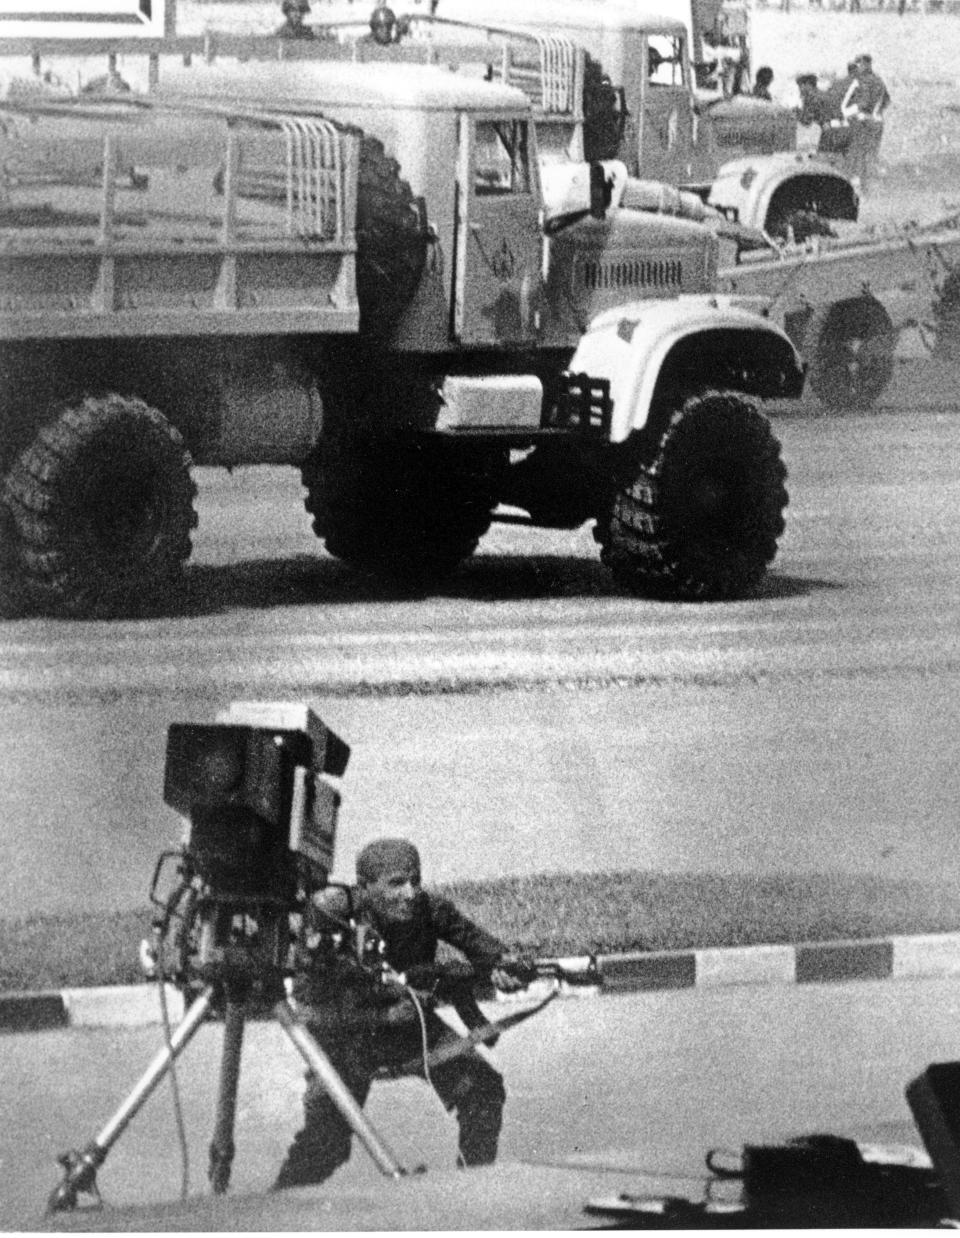 FILE - In this Oct. 6, 1981 file photo, a gunman, wearing an Egyptian army uniform, fires an automatic Kalashnikov rifle into the reviewing stand during an attack that took the life of President Anwar Sadat and five others in Cairo, Egypt. Iran's 1979 Islamic Revolution initially inspired both Islamic militants and Islamists across the Mideast. They saw the revolution as the starting gun in a competition to push out the strongman Arab nationalism that had taken hold across the Middle East. However, analysts say Iran's push to back militants in the wider Mideast and Saudi Arabia's efforts to mobilize the Sunni world against the Shiite power would turn many away. (AP Photo, File)